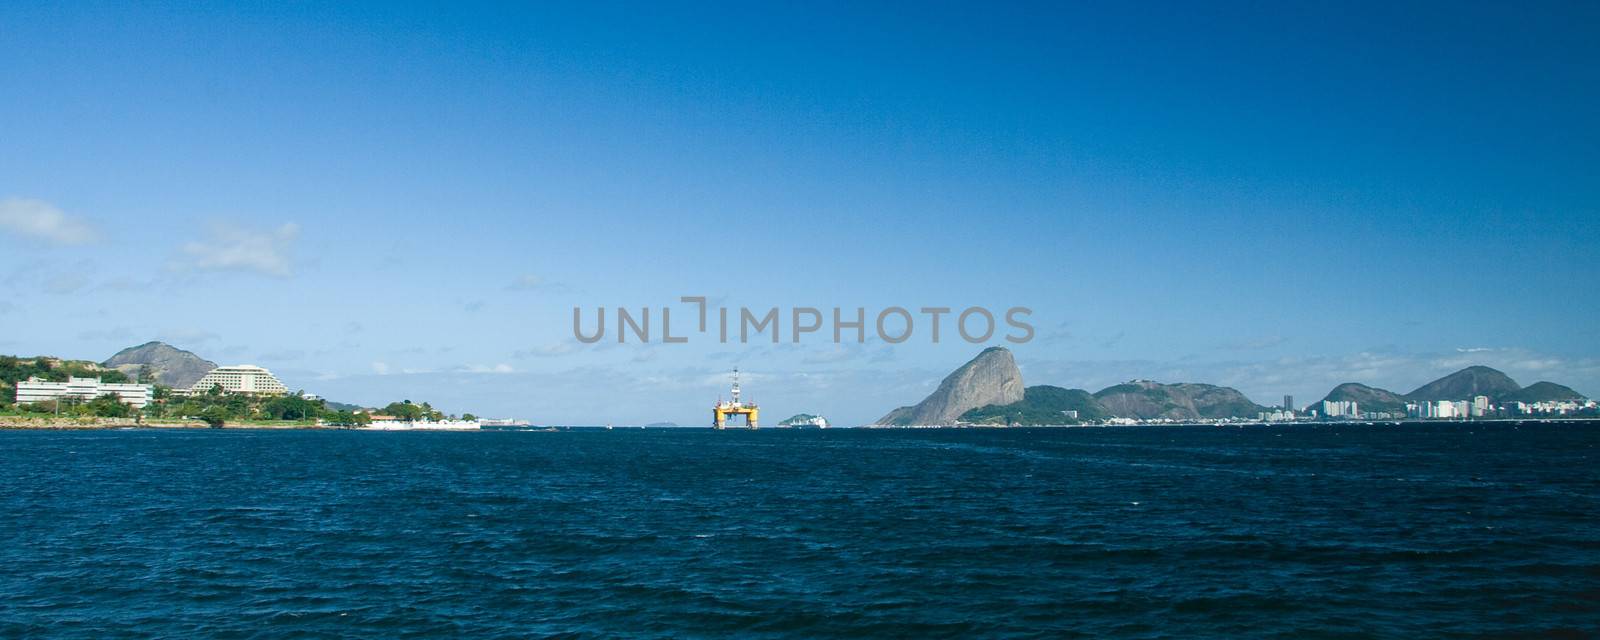 Distant view of Sugarloaf Mountain and Oil Rig in Rio De Janeiro, Brazil